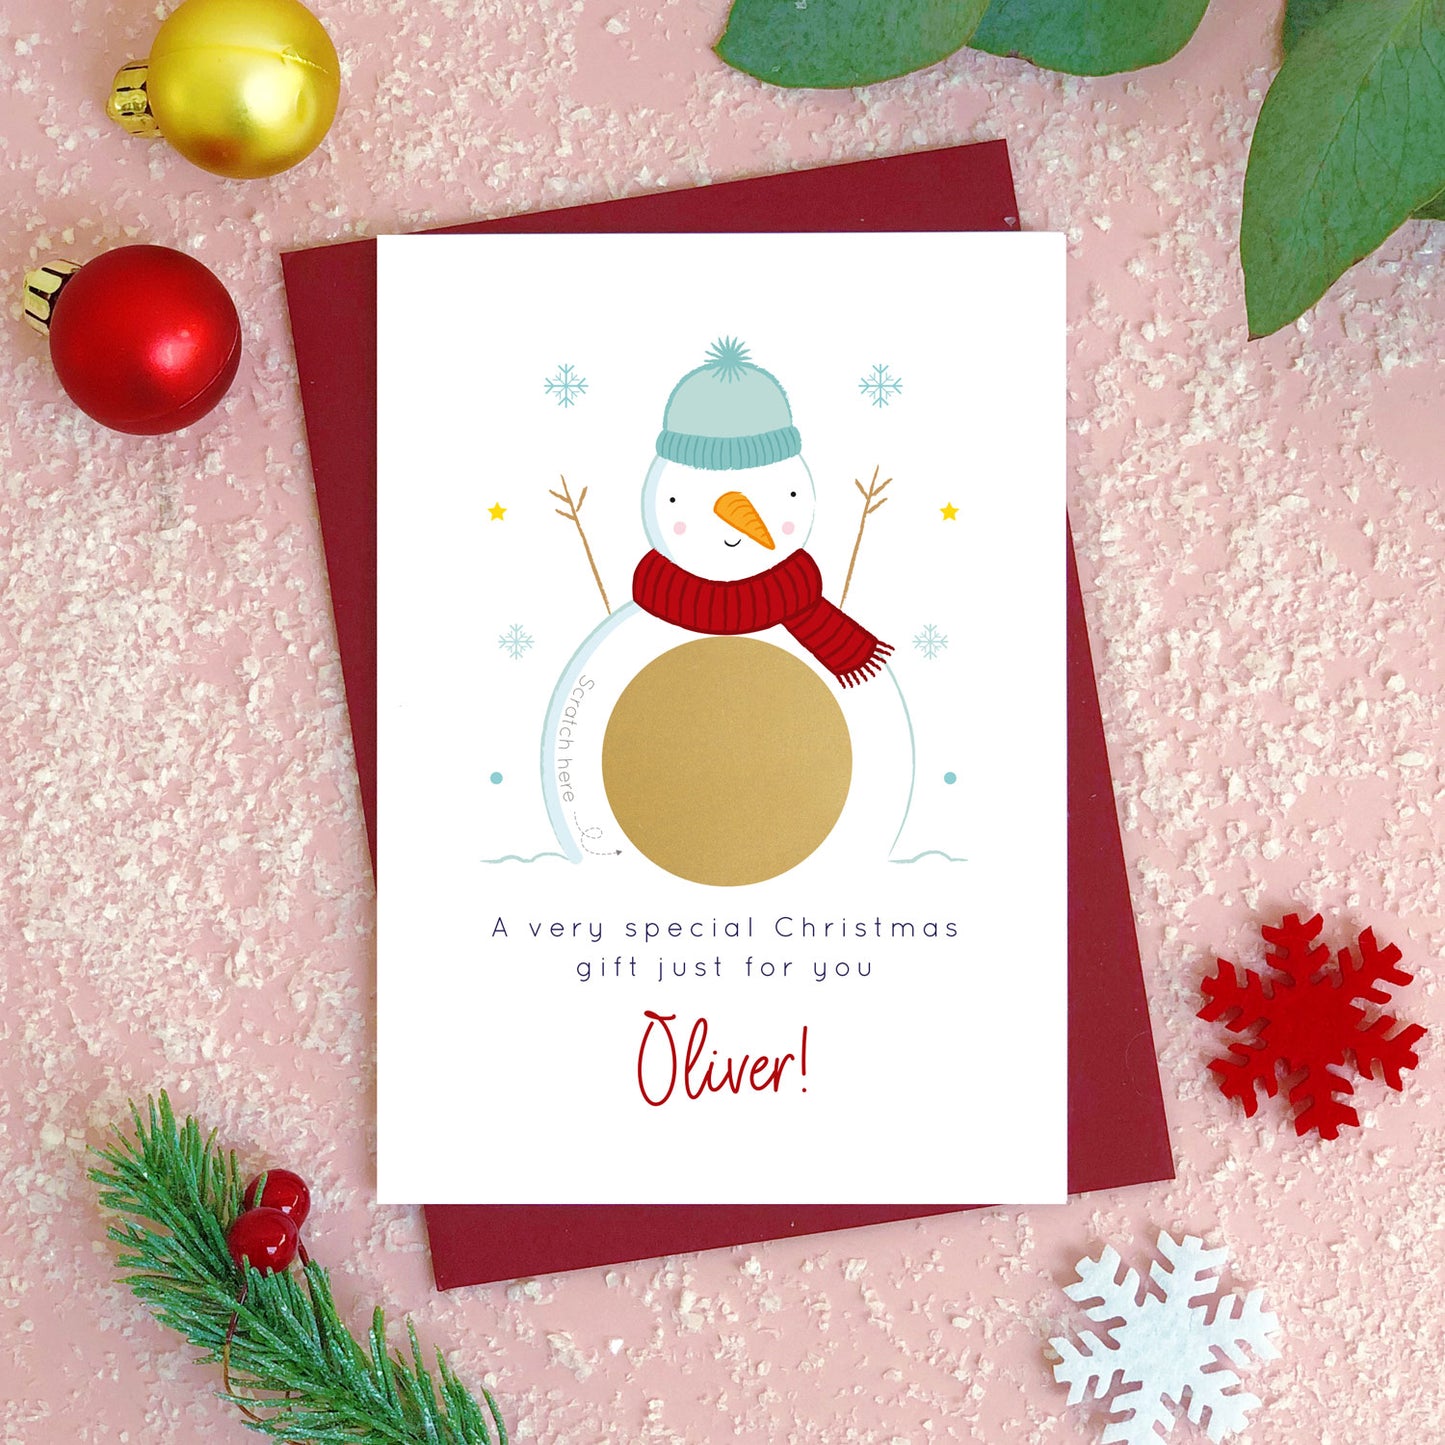 A personalised snowman christmas scratch card photographed flat lying on a red wine coloured envelope on a pink surface surrounded by fake snow, baubles and foliage. The gold panel has not yet been scratched off to reveal the custom message.